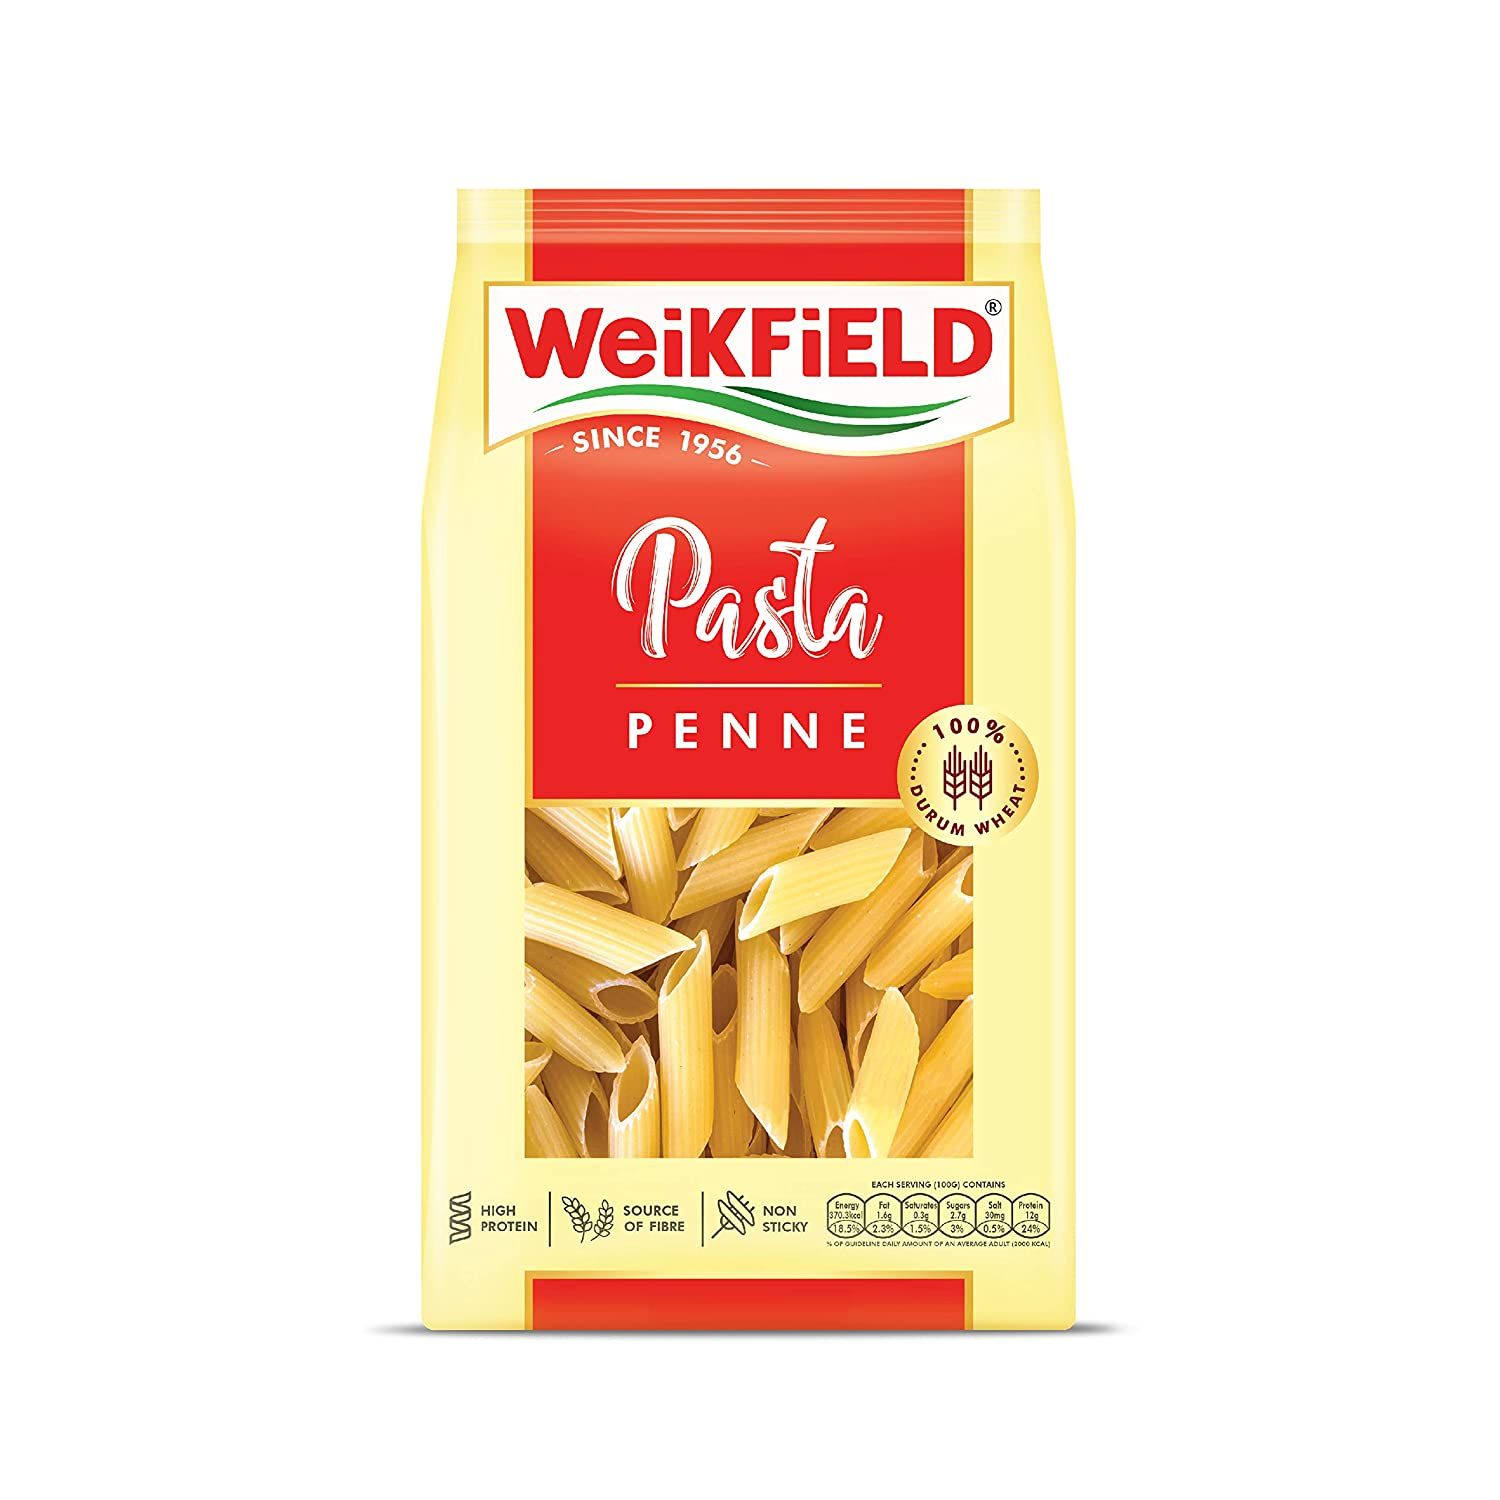 Weikfield Penne Pasta Image